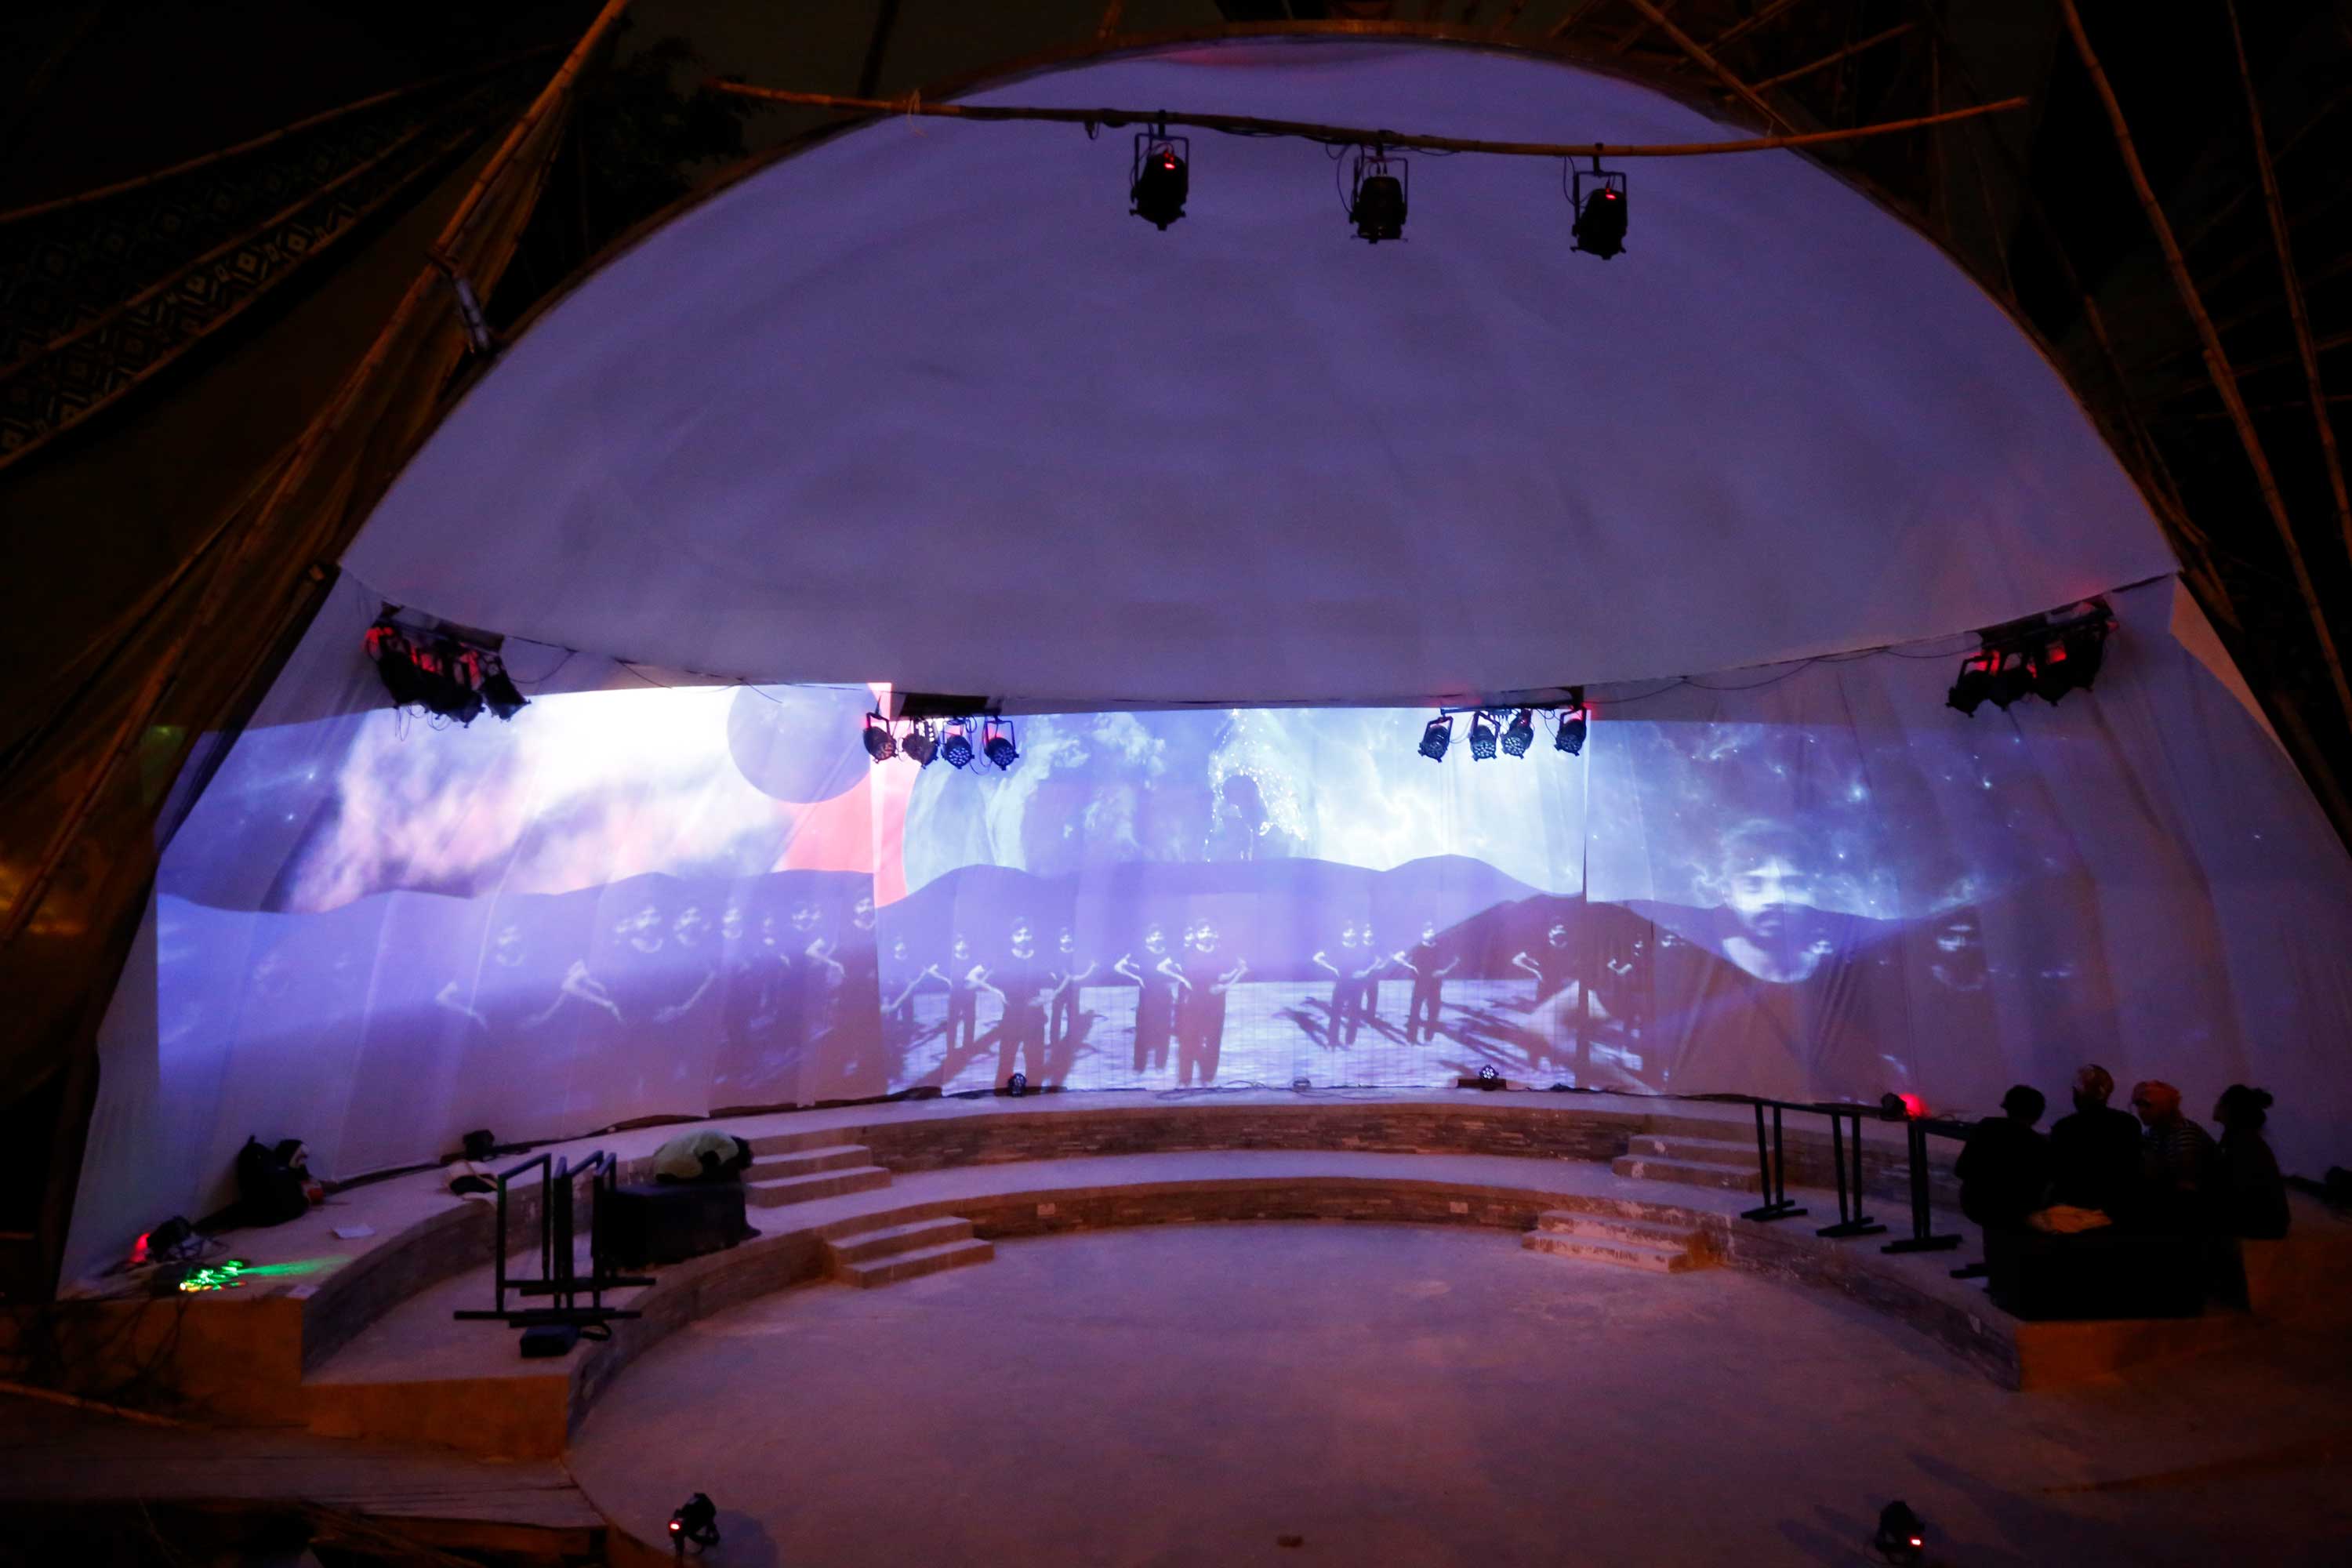 Performance image of Thought Curfew by David Cotterrell. A dome-shaped stage has videos displayed on the back wall.